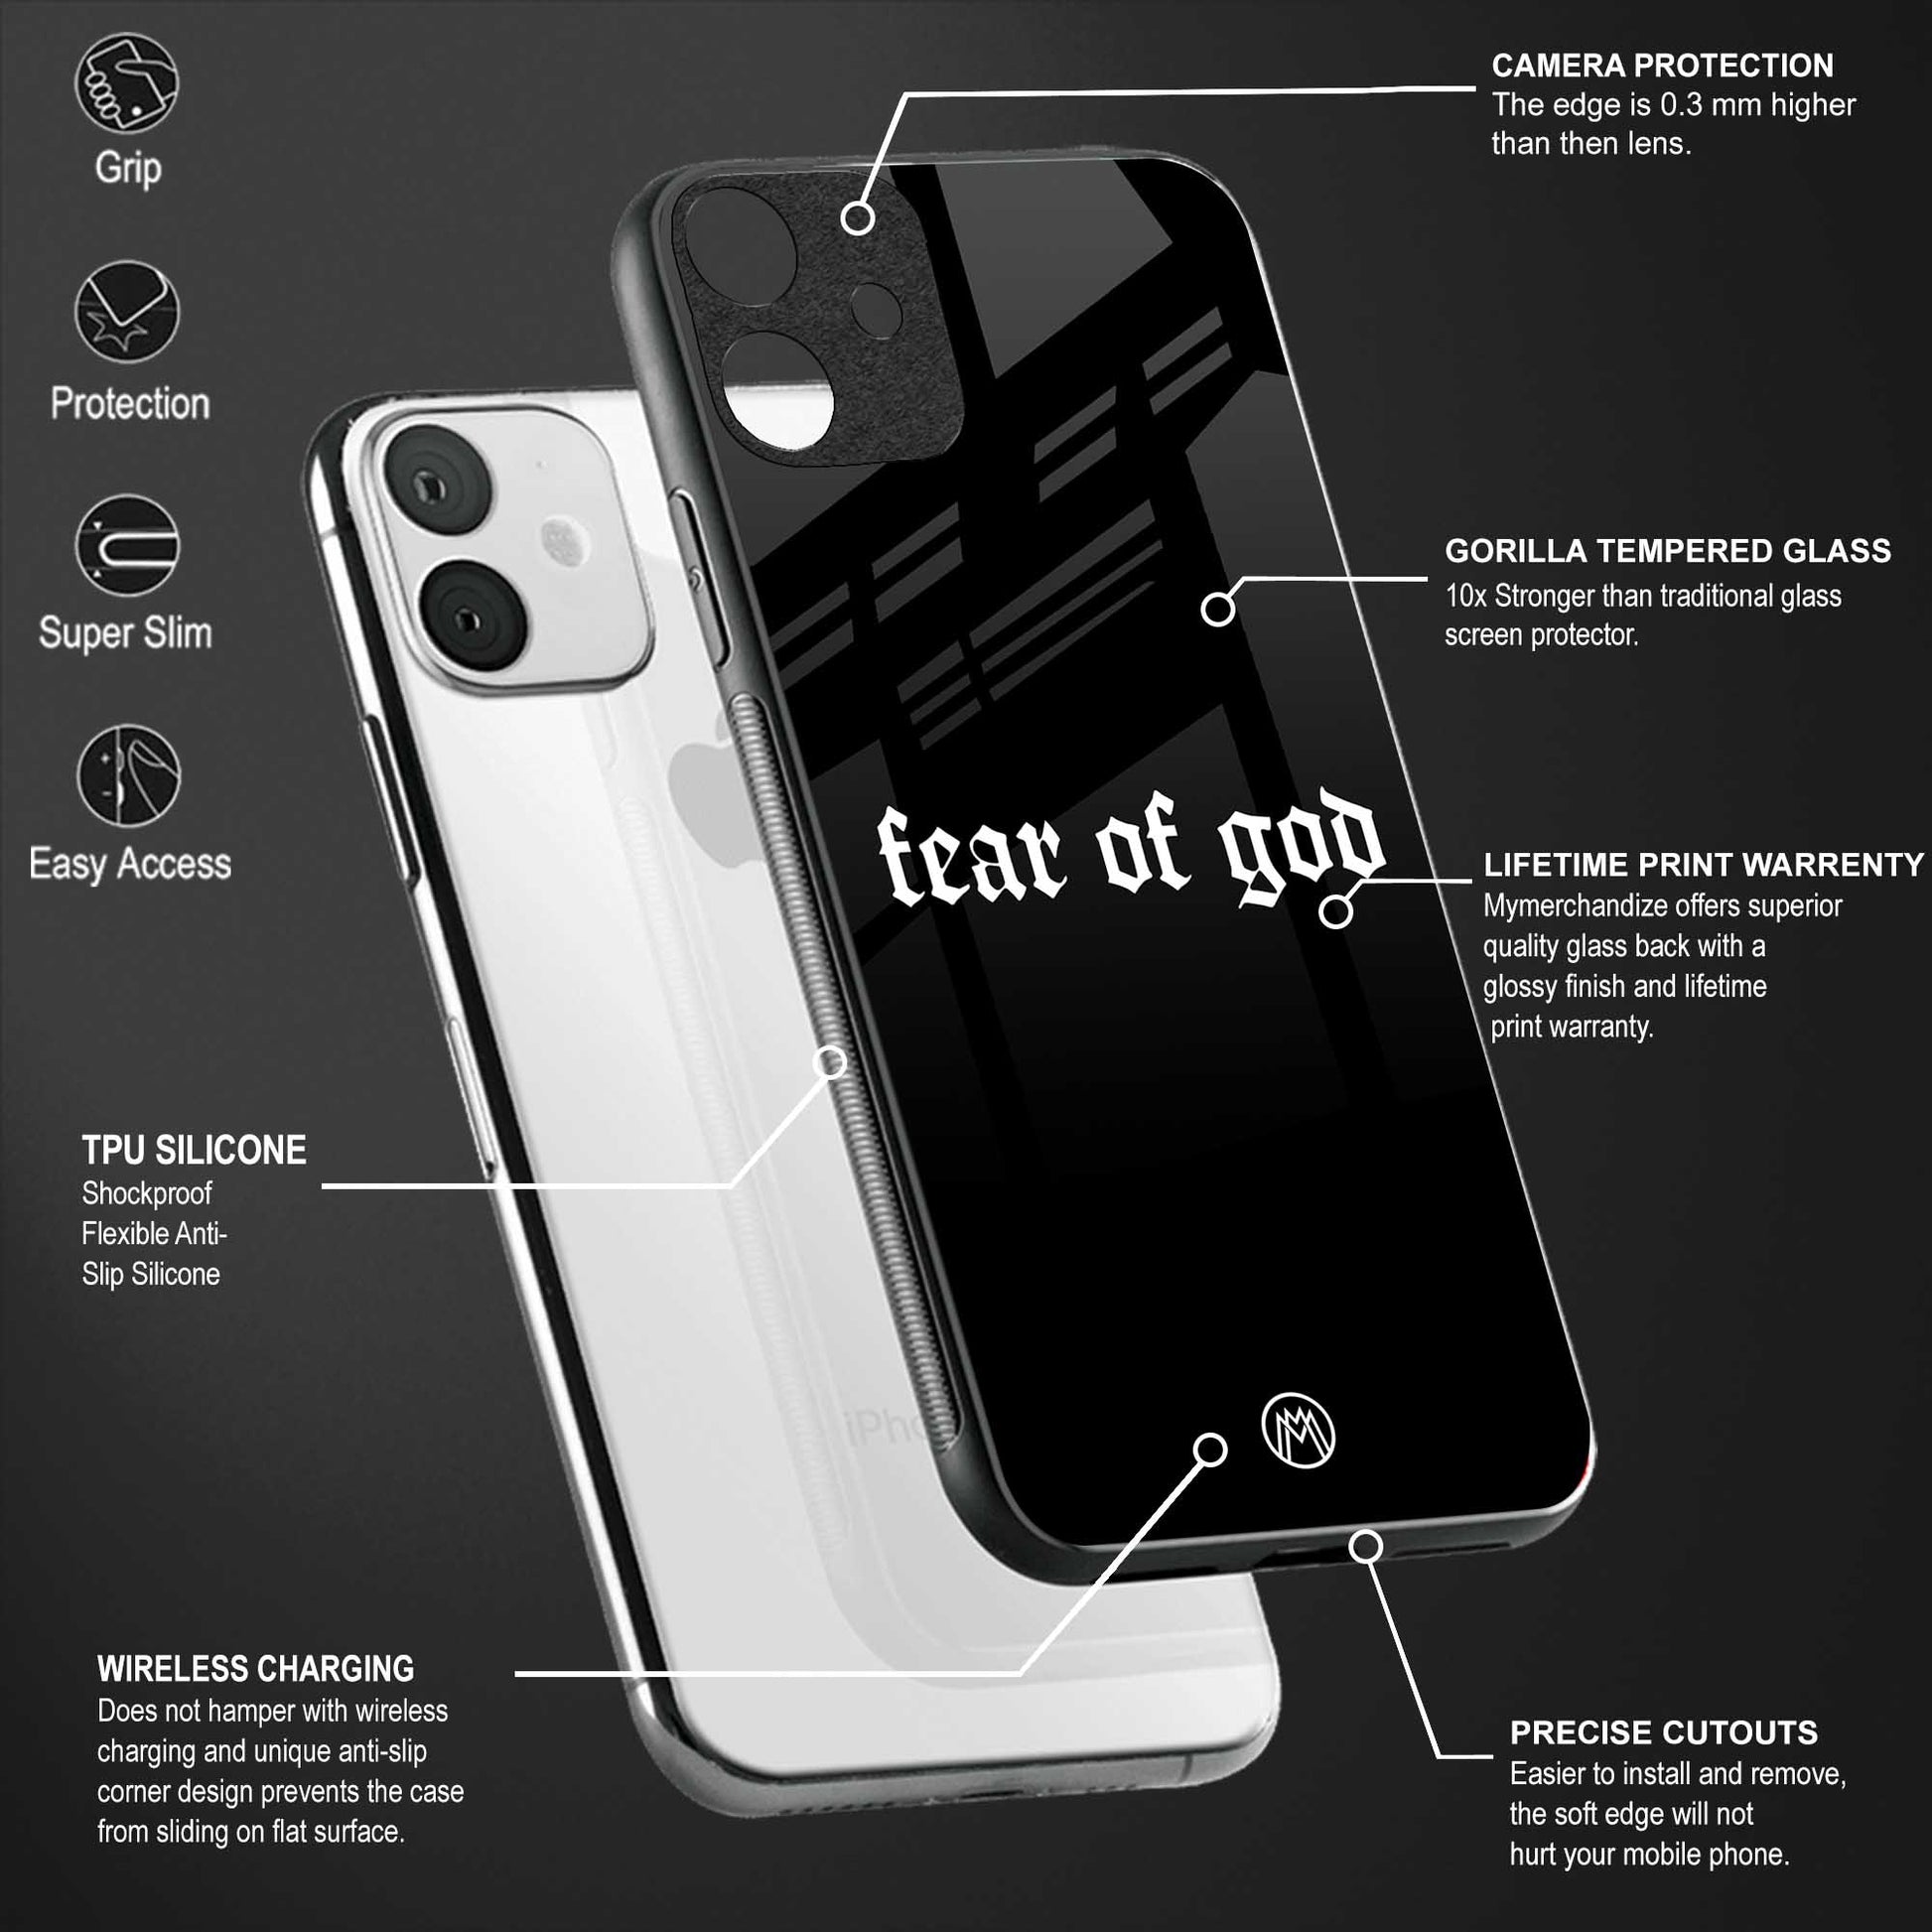 fear of god phone cover for iphone 11